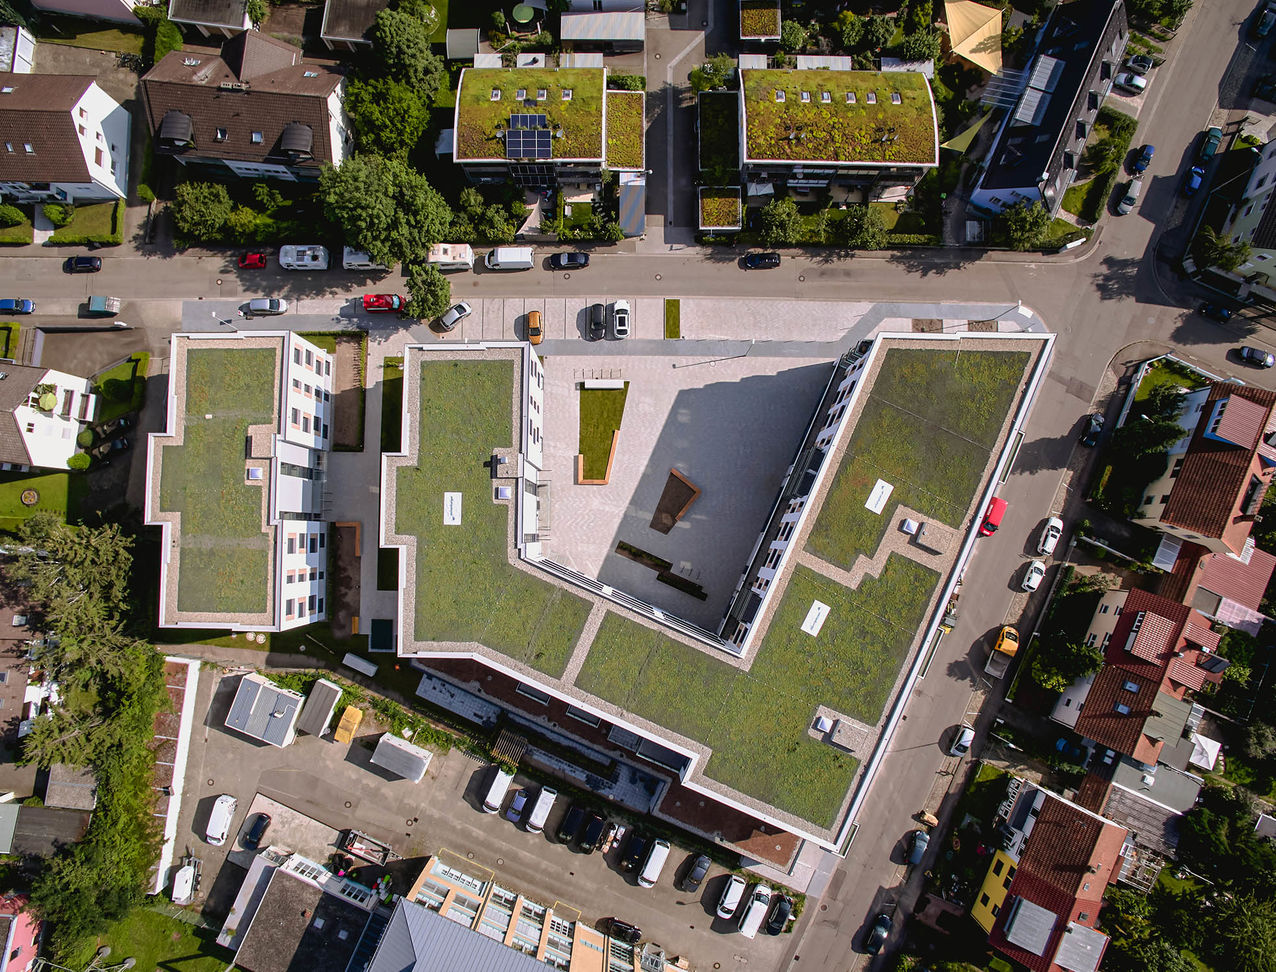 Drone image of an apartment building in Freiburg that was built by weisenburger